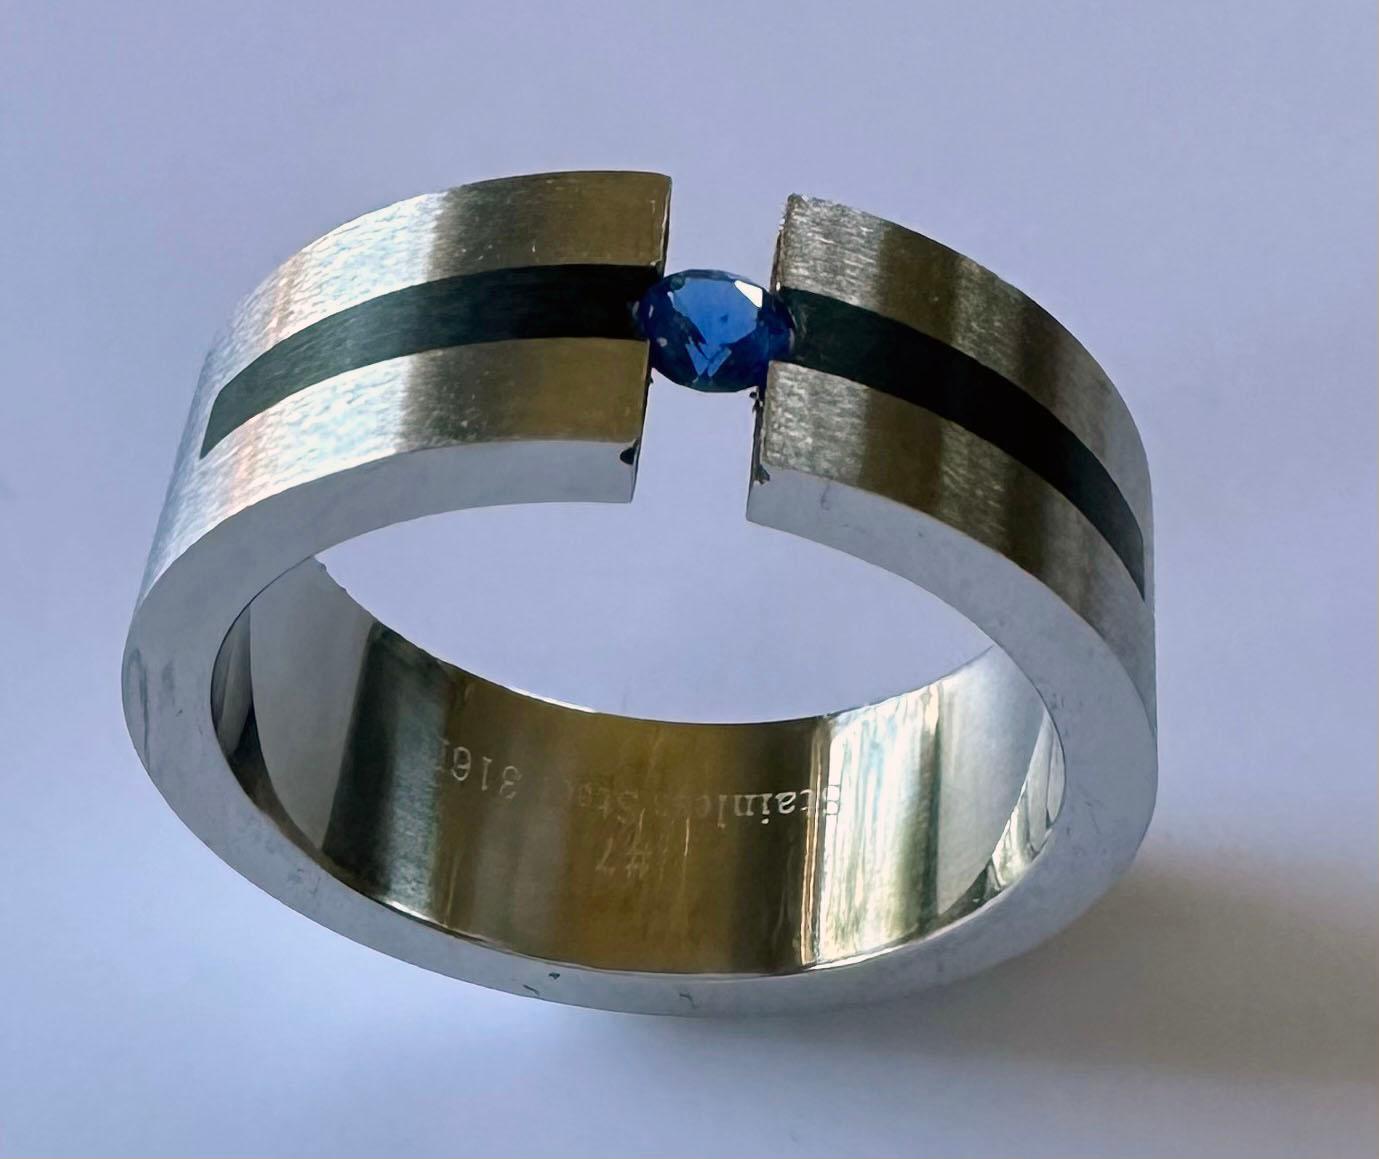 Stainless Steel Tension Ring set with Sapphire In New Condition For Sale In Seattle, WA